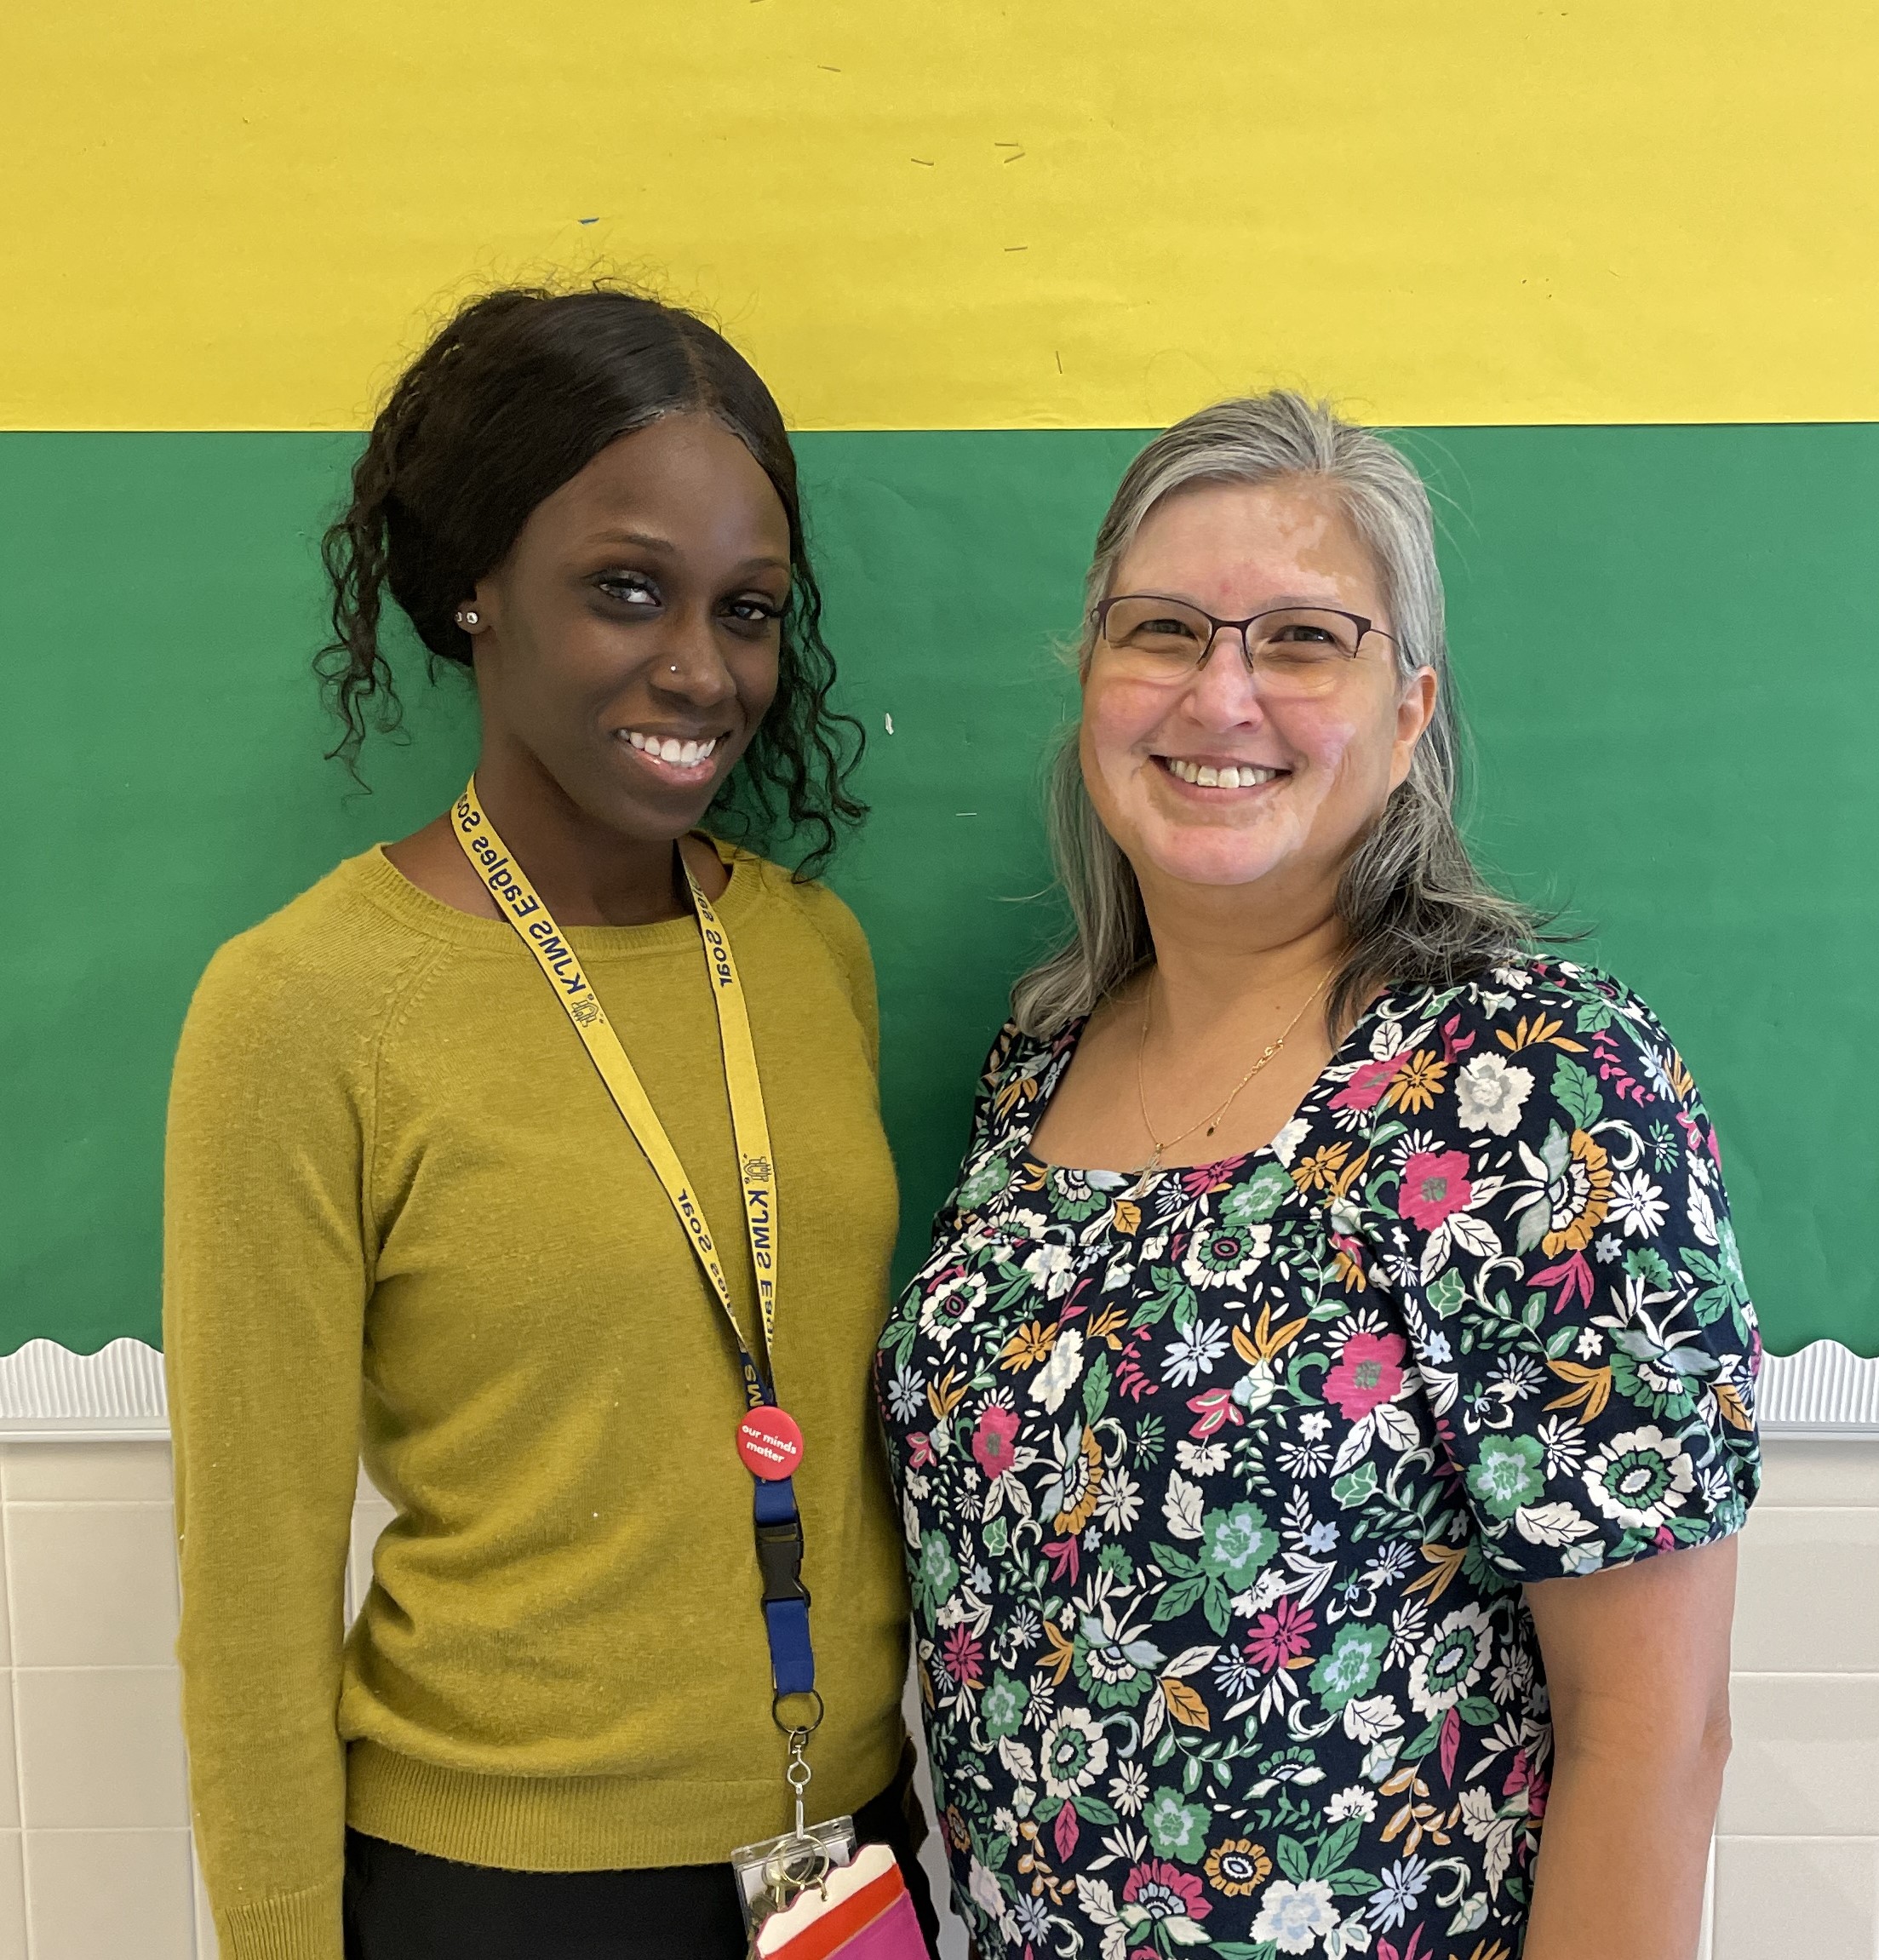 Ms. Amadu and Ms. Marris